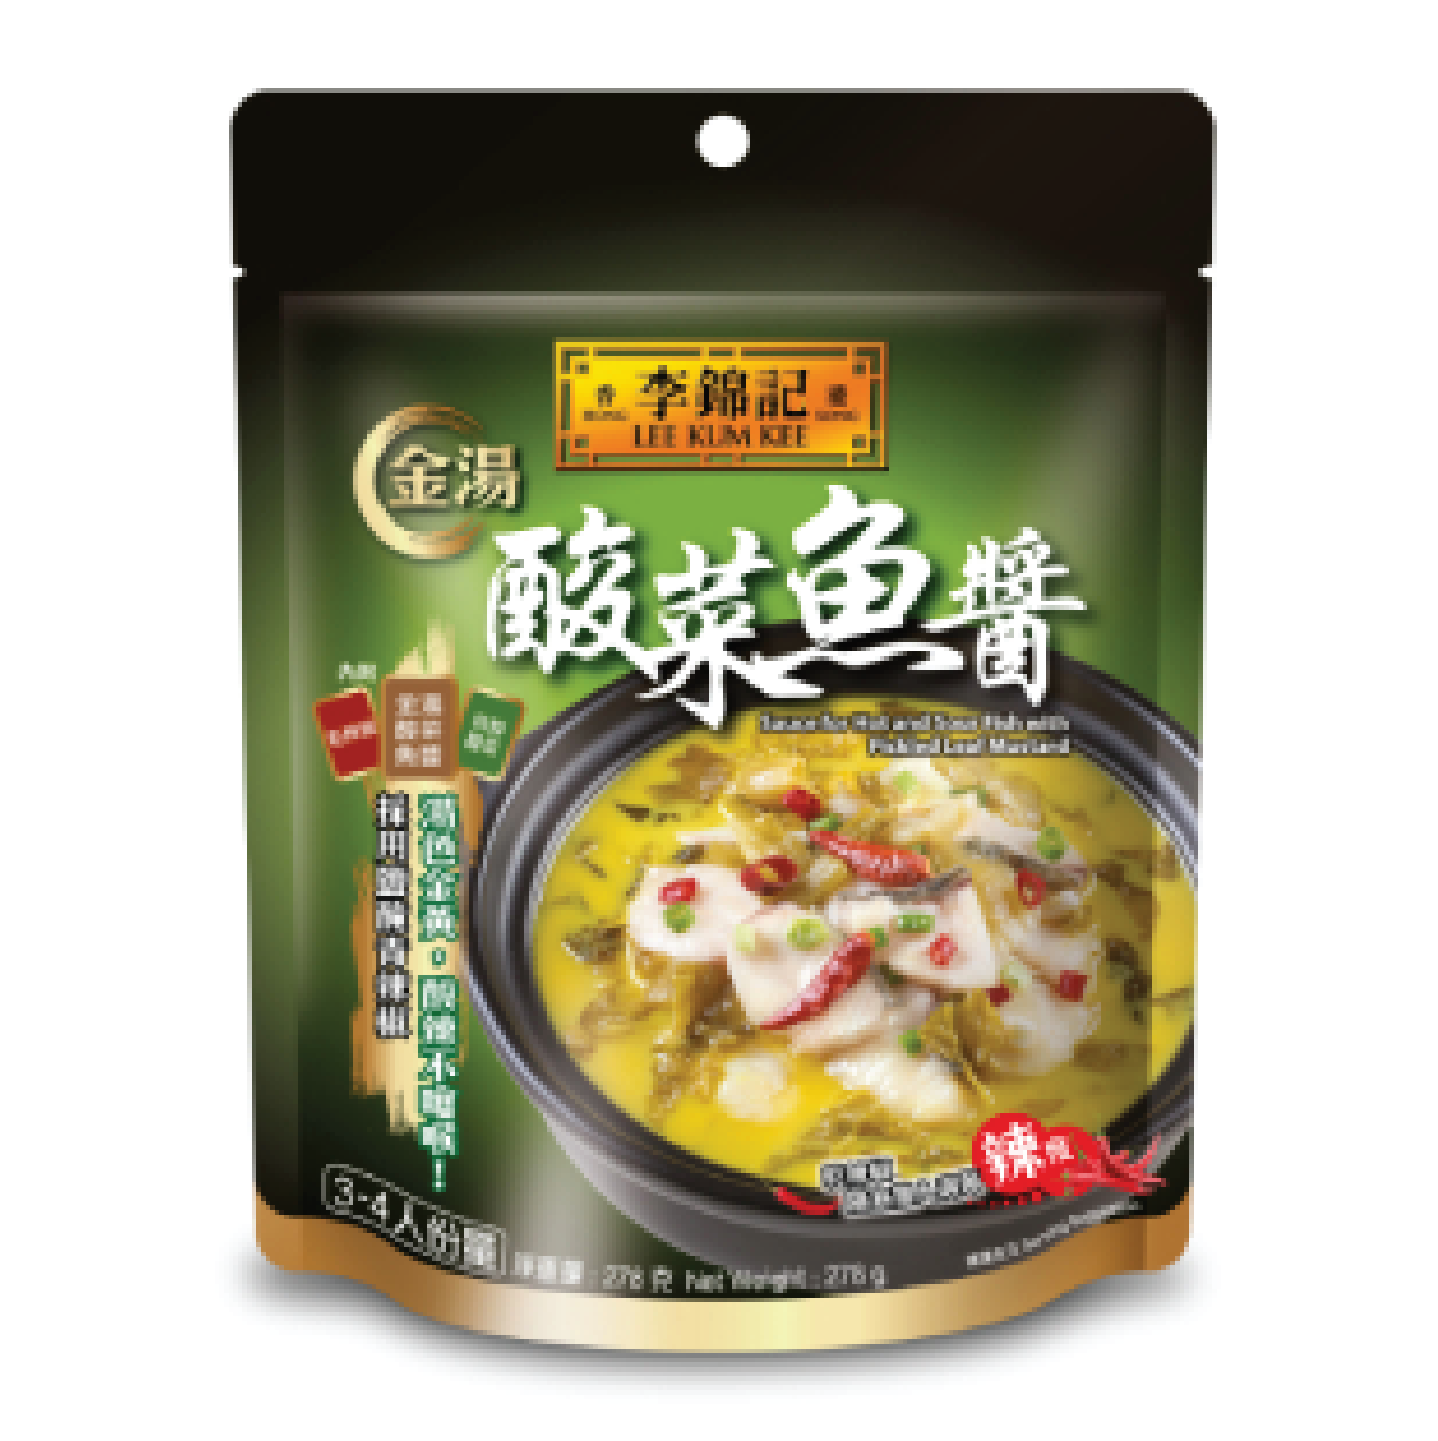 LEE KUM KEE SAUCE FOR HOT AND SOUR FISH WITH PICKLED LEAF MUSTARD 李錦記 金湯酸菜魚醬278克